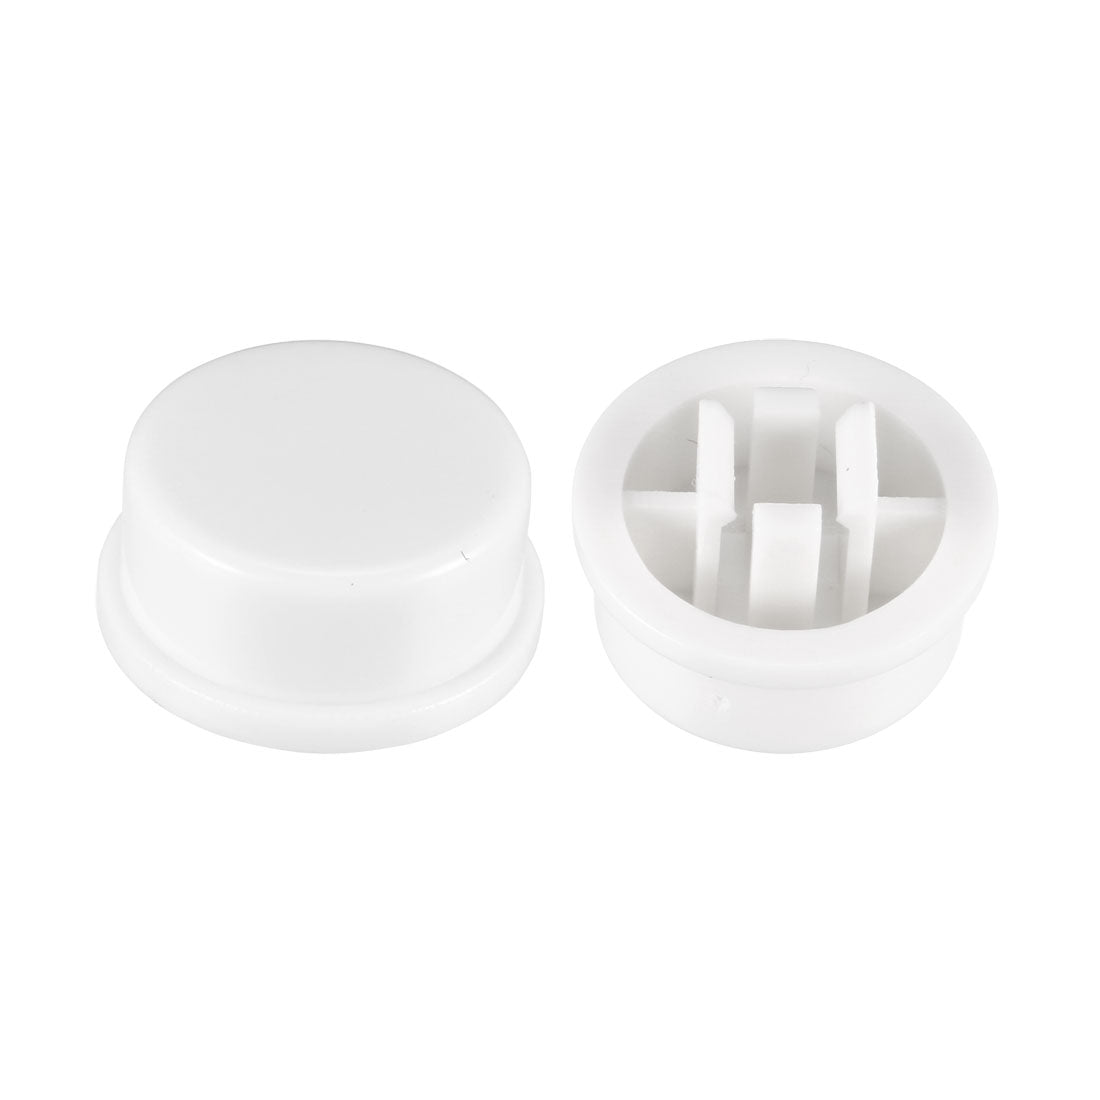 uxcell Uxcell 20Pcs Plastic 13x5.6mm Pushbutton Tactile Switch Caps Cover Keycaps White for 12x12x7.3mm Tact Switch